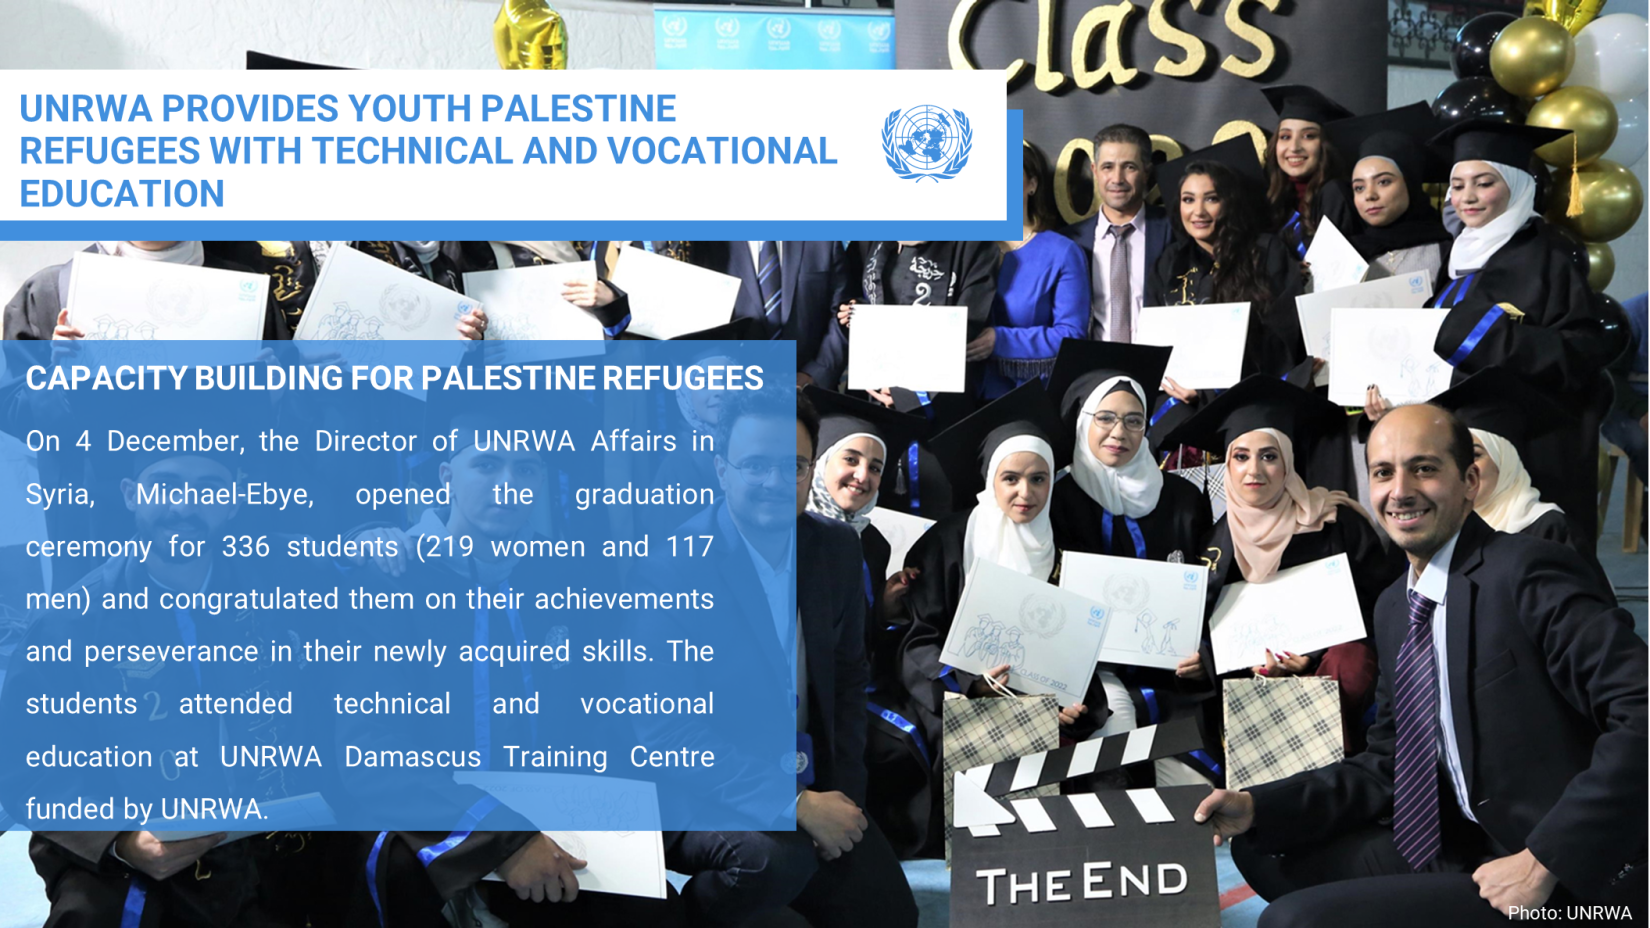 UNRWA PROVIDES YOUTH PALESTINE REFUGEES WITH TECHNICAL AND VOCATIONAL EDUCATION